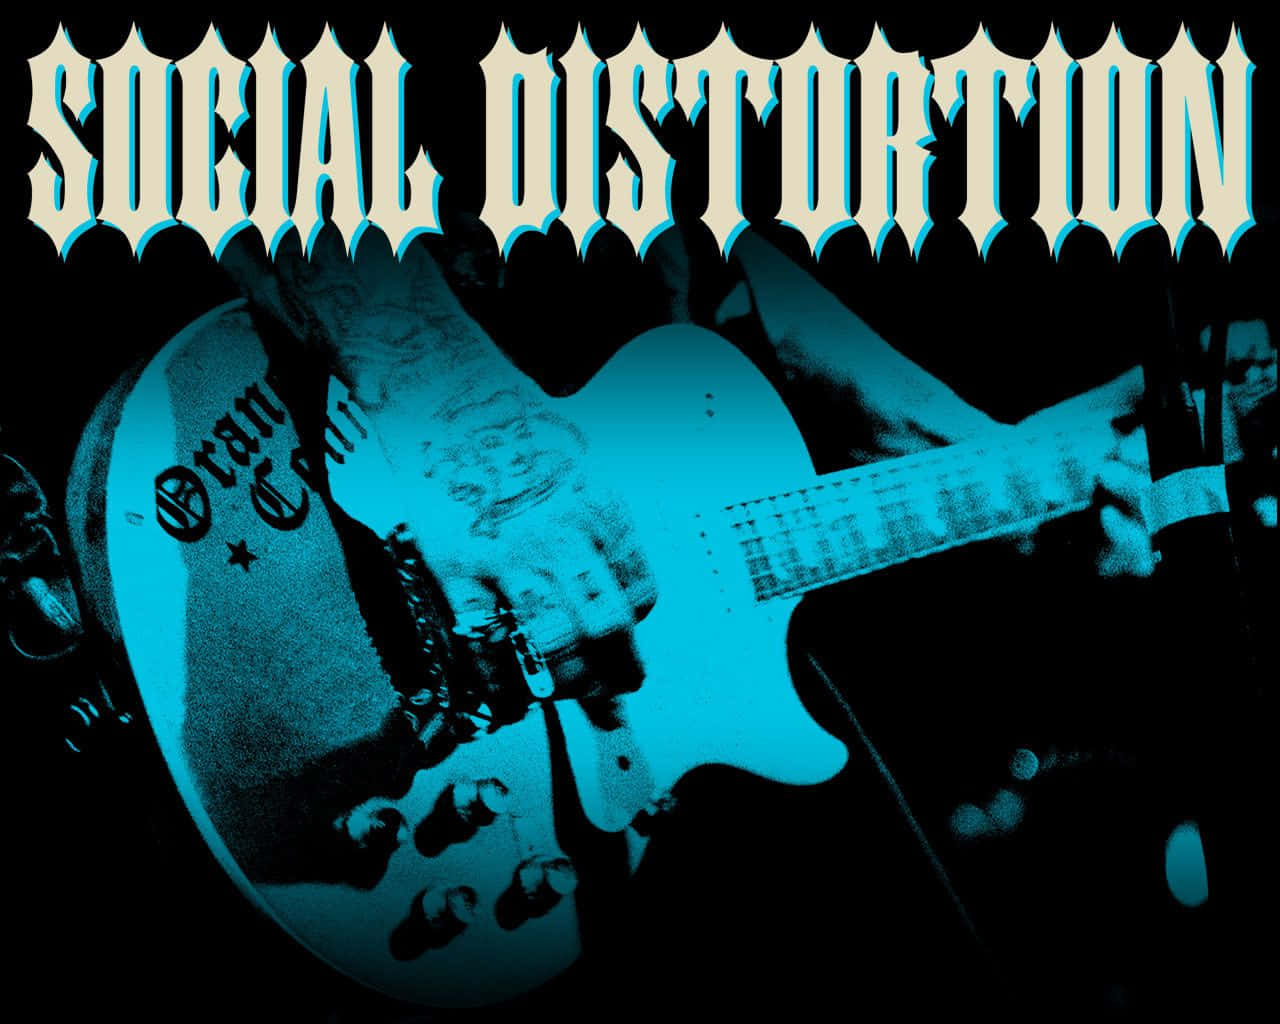 Iconic Punk Rock Band - Social Distortion In Concert Background